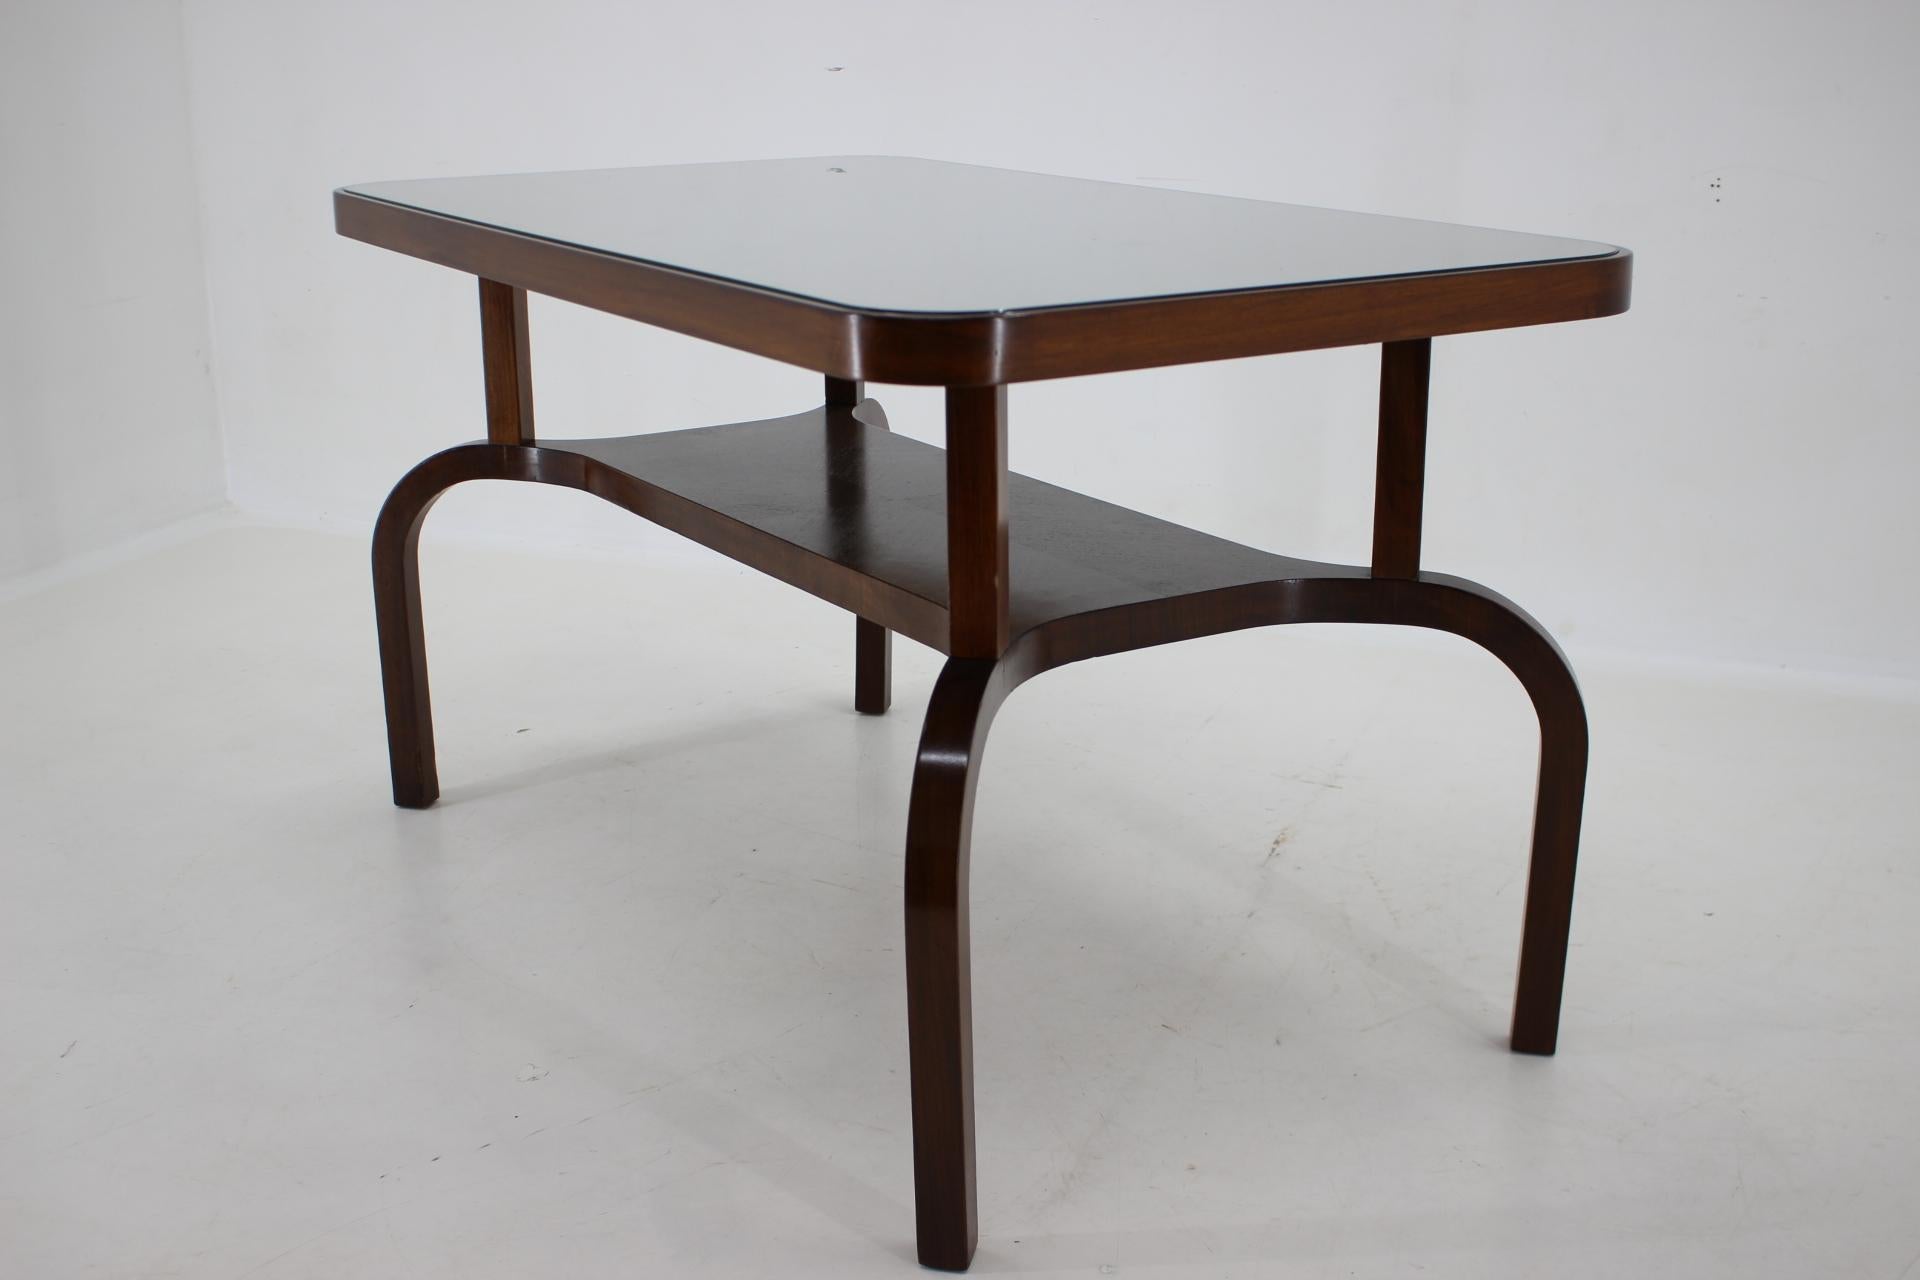 1930s Restored Coffee Table in Walnut with Glass Top, Czechoslovakia For Sale 3